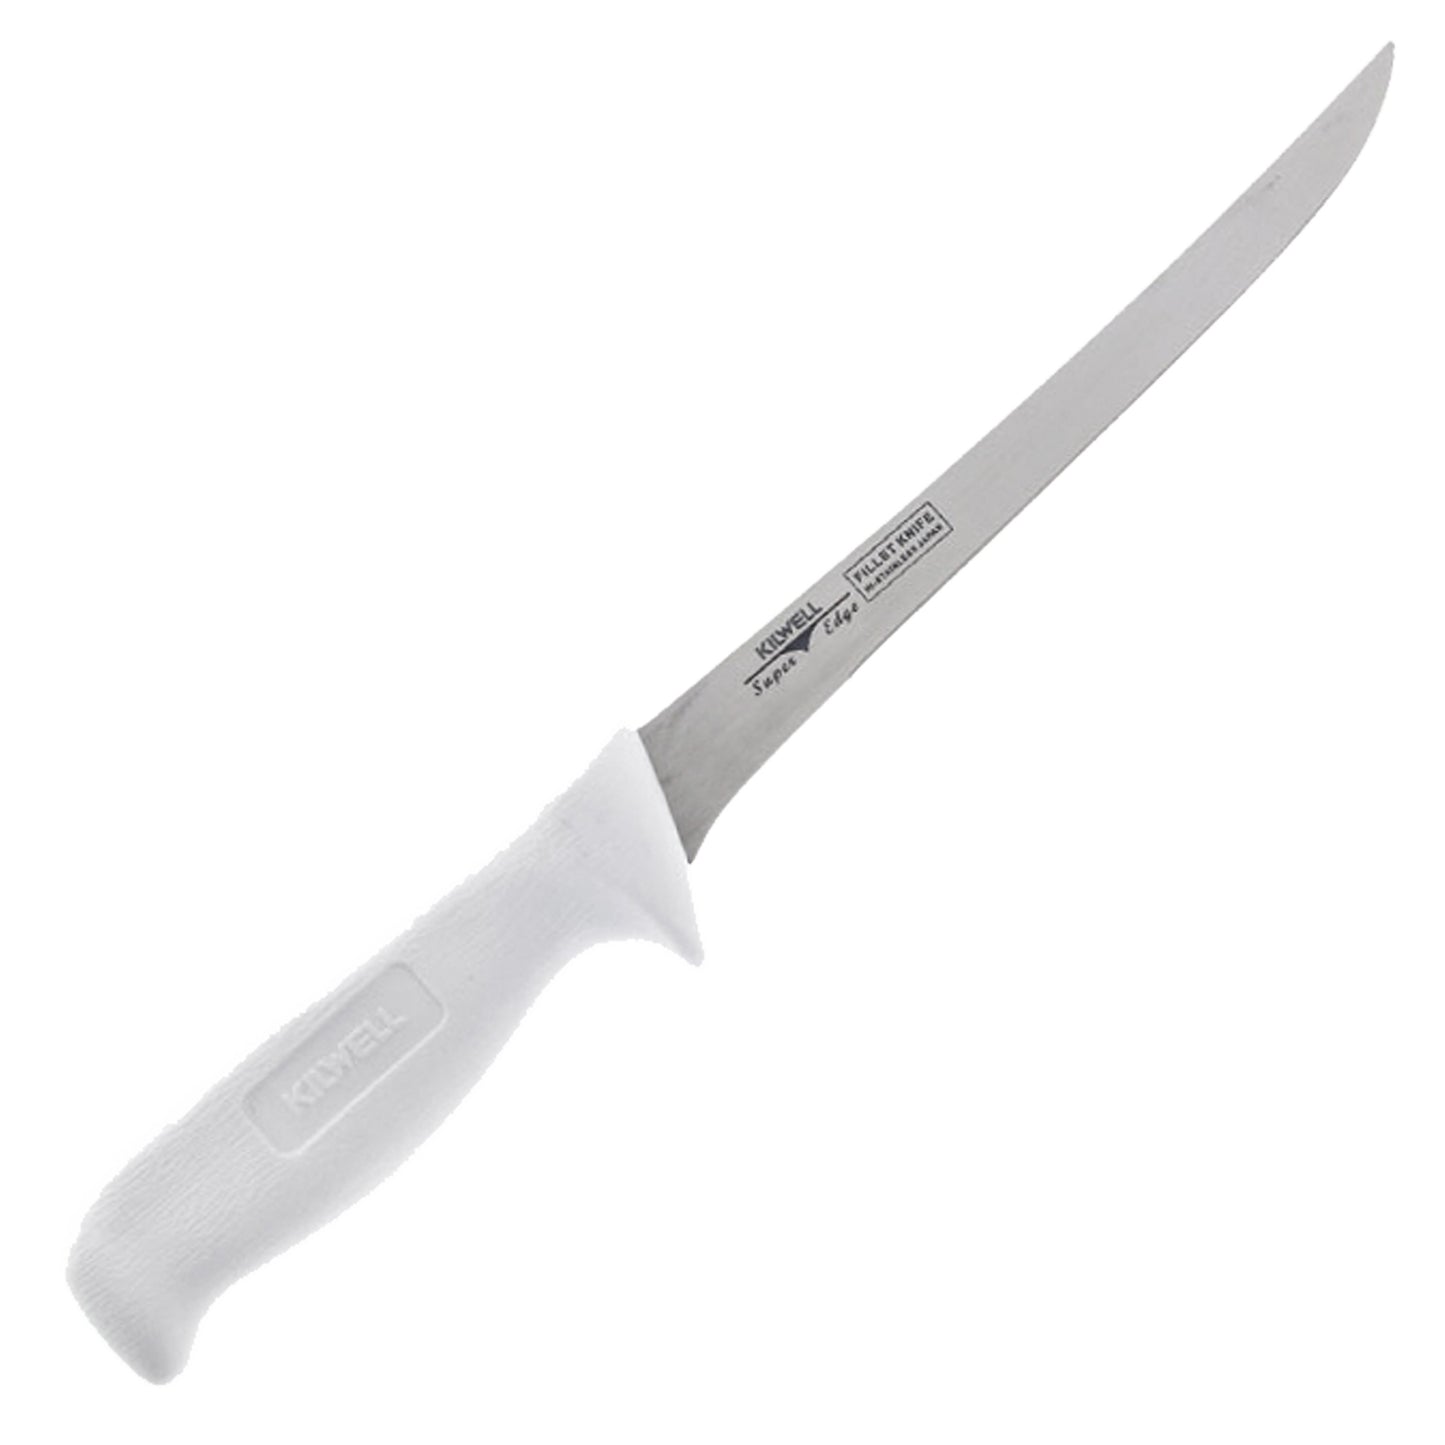 Kilwell 200mm Fish Filleting Knife with Flexible Blade